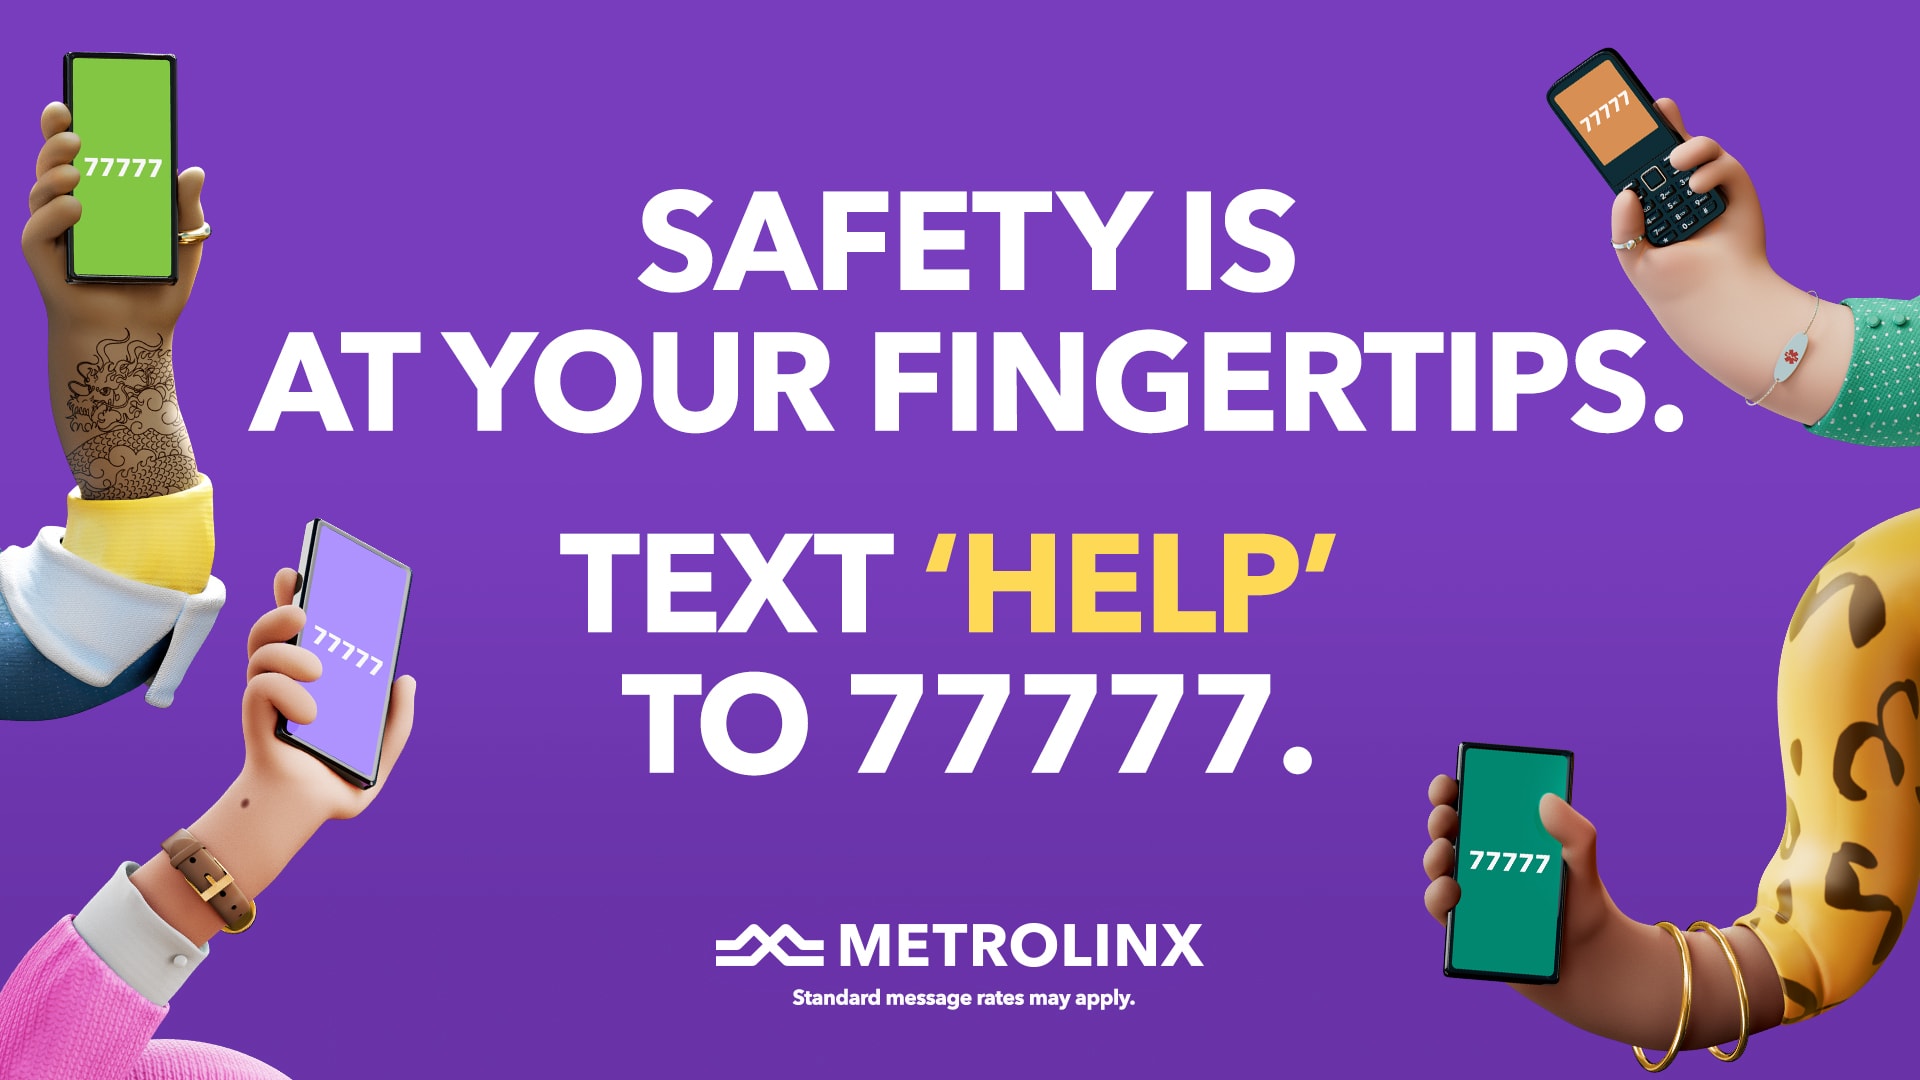 Text HELP to 77777